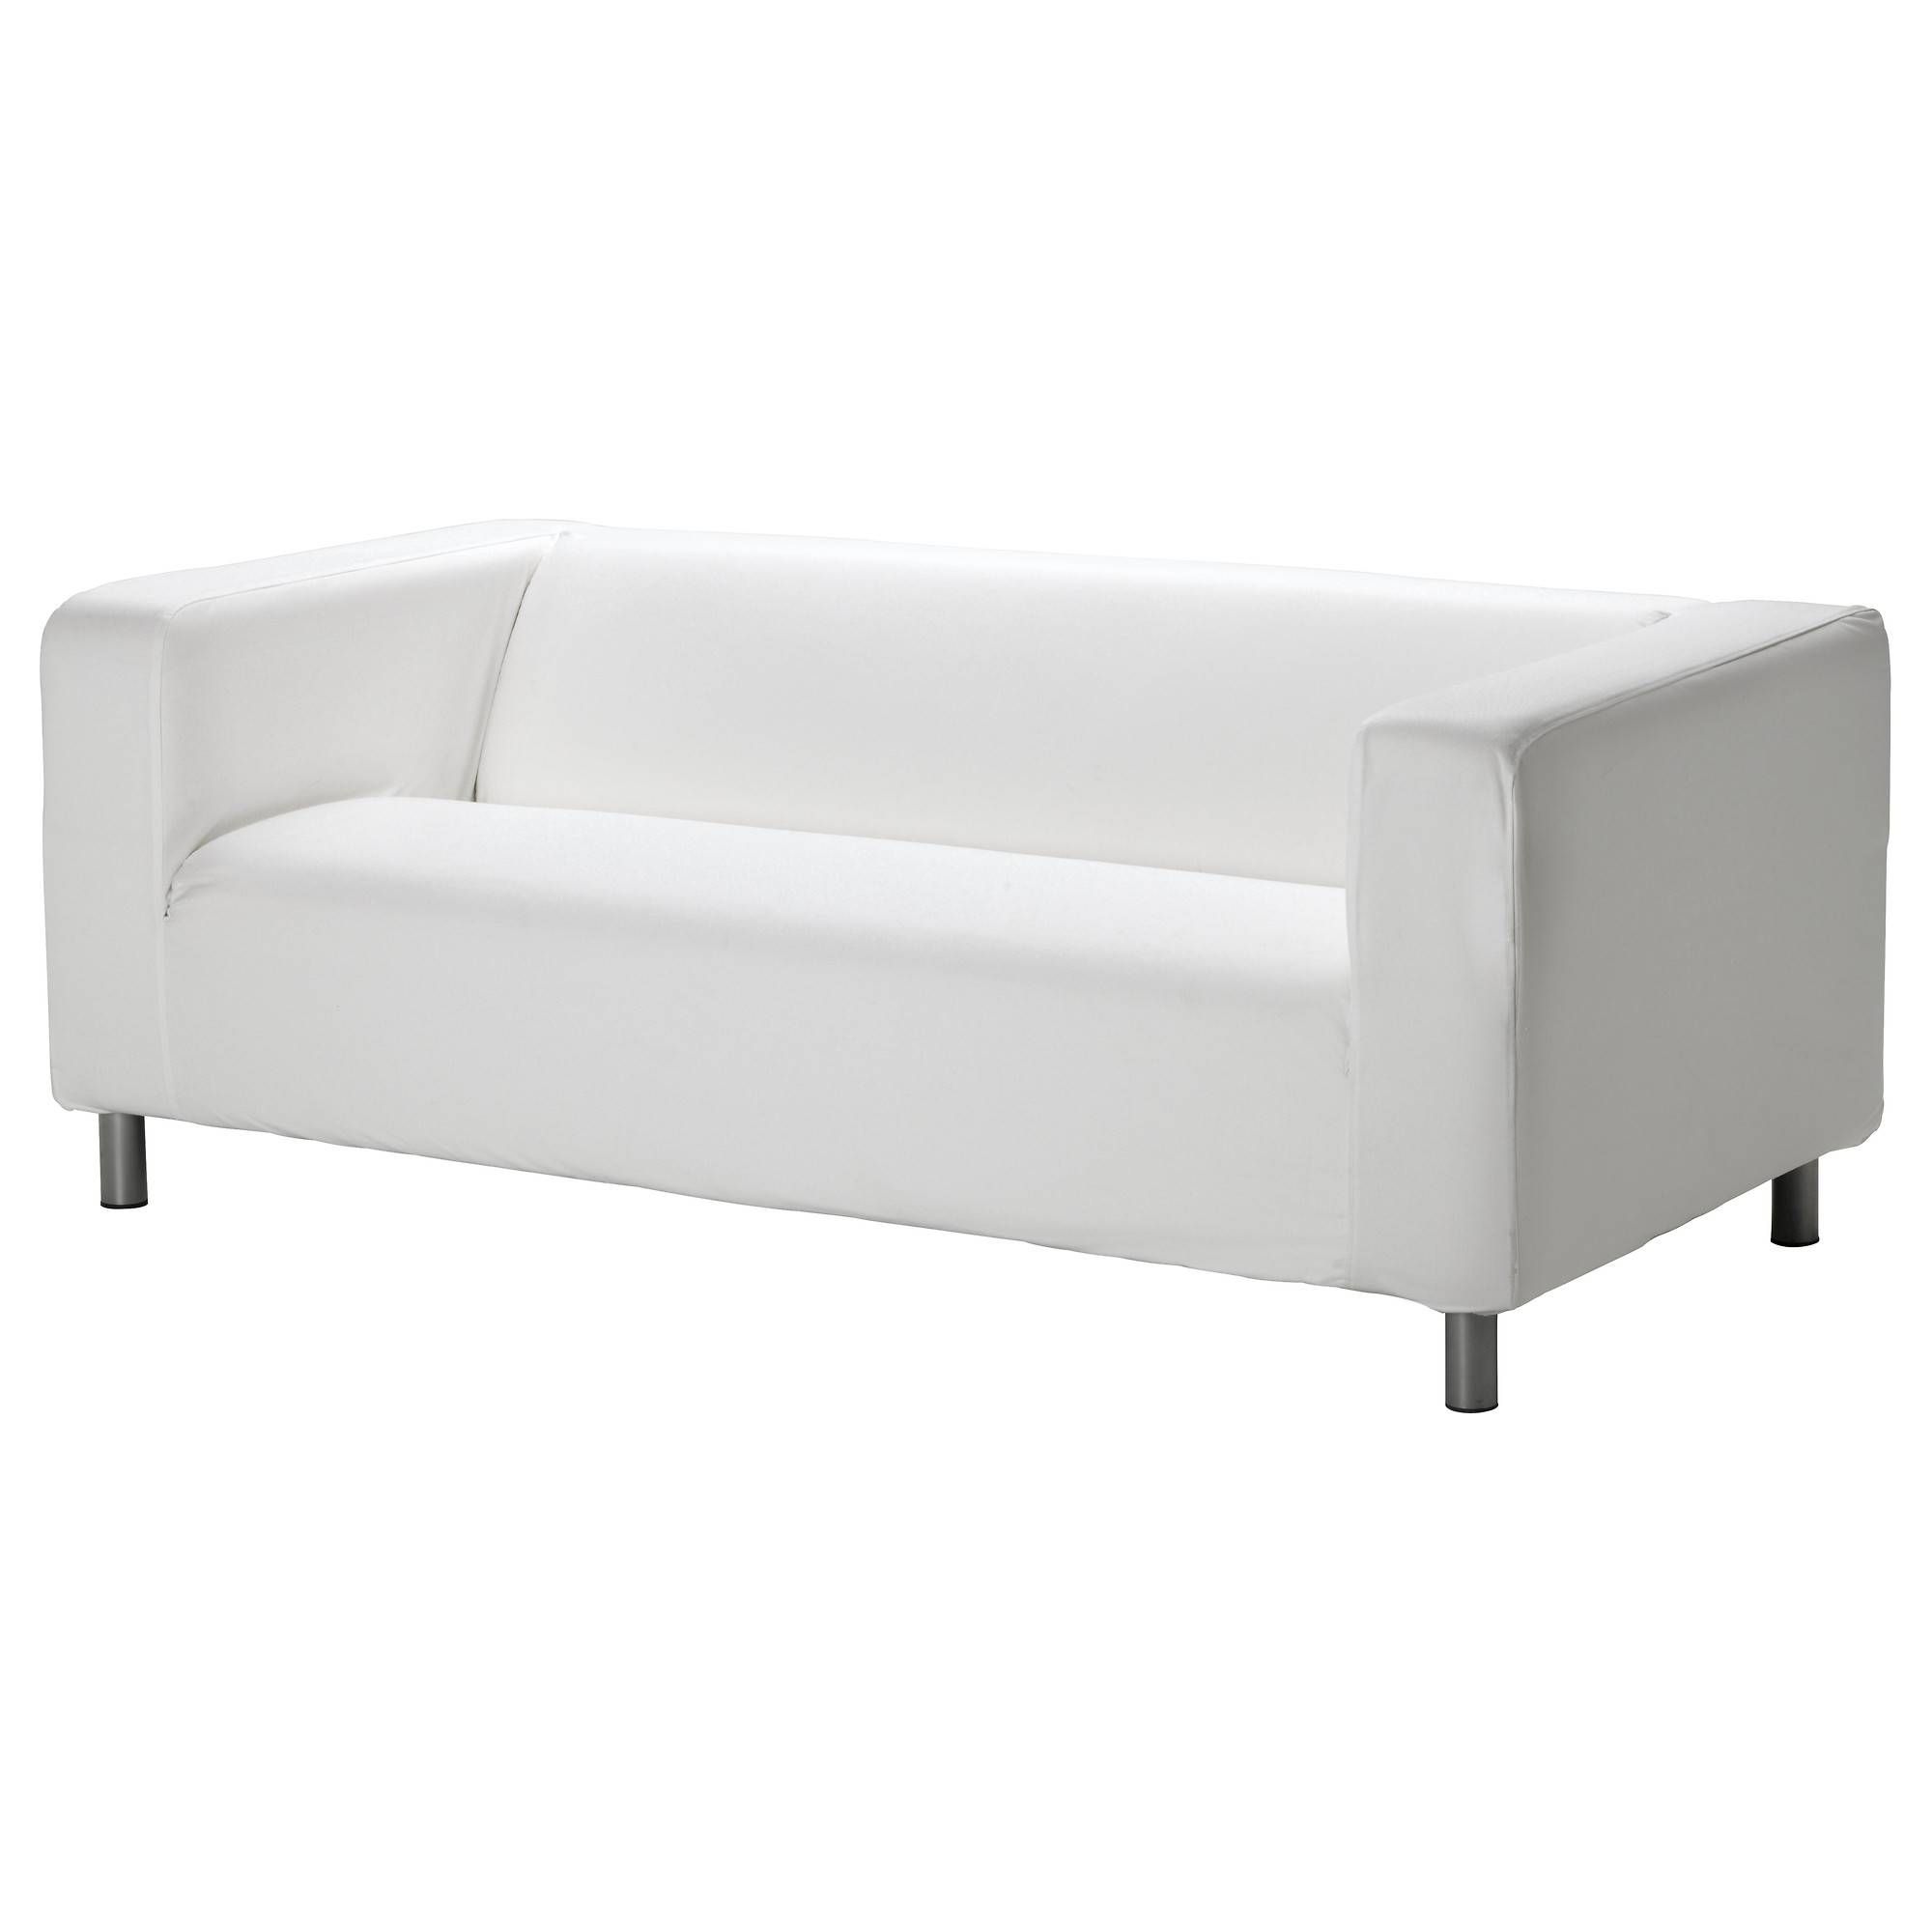 All Sofas – Ikea With White Sofa Chairs (View 16 of 30)